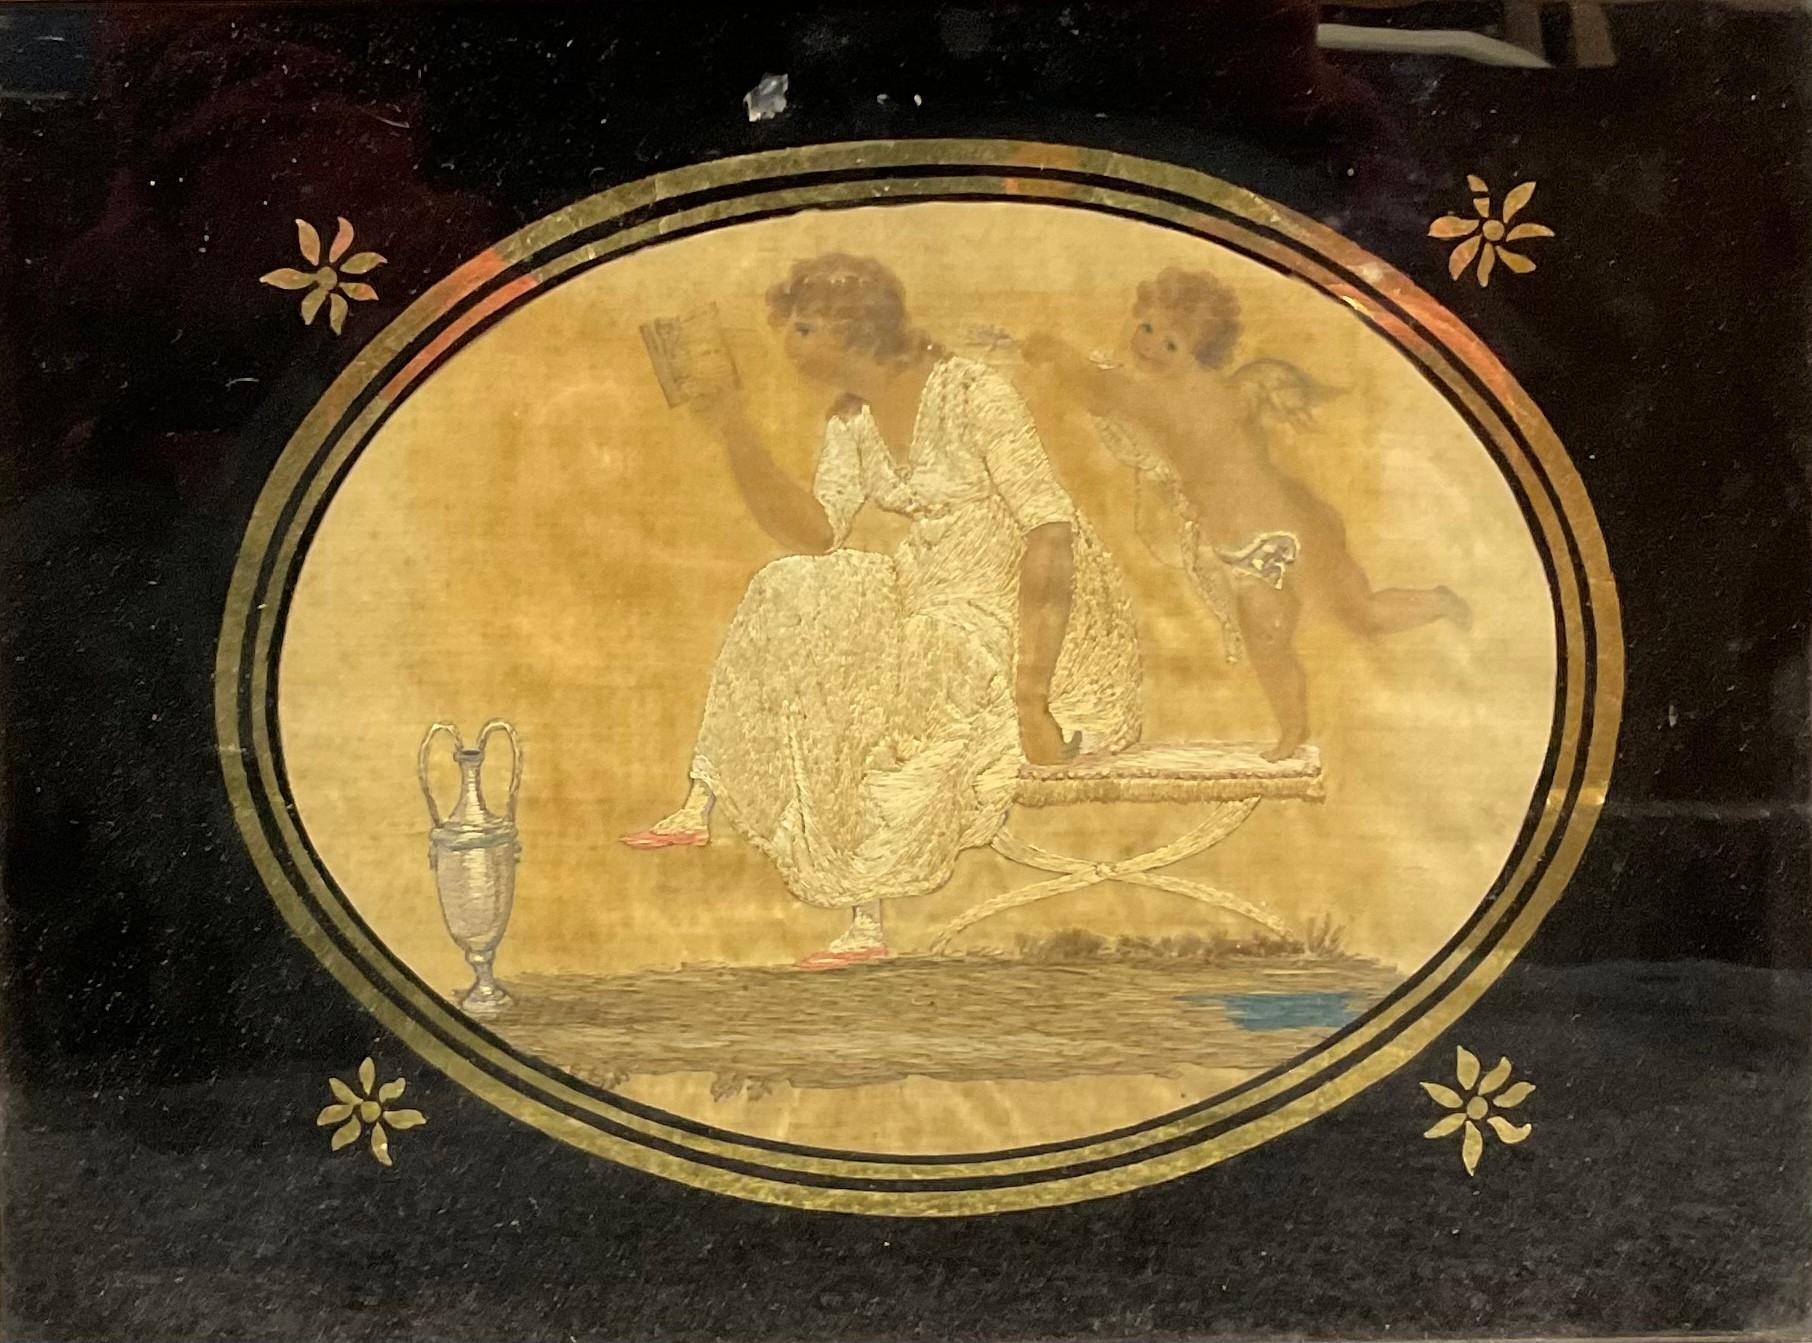 Pair of George III Glomyized Glass Mythological Silk Pictures of Eros & Psyche 
Dating to early late 19th century
From a private collection

Eros and Psyche are figures from ancient Greek mythology, and their story is often referred to as 